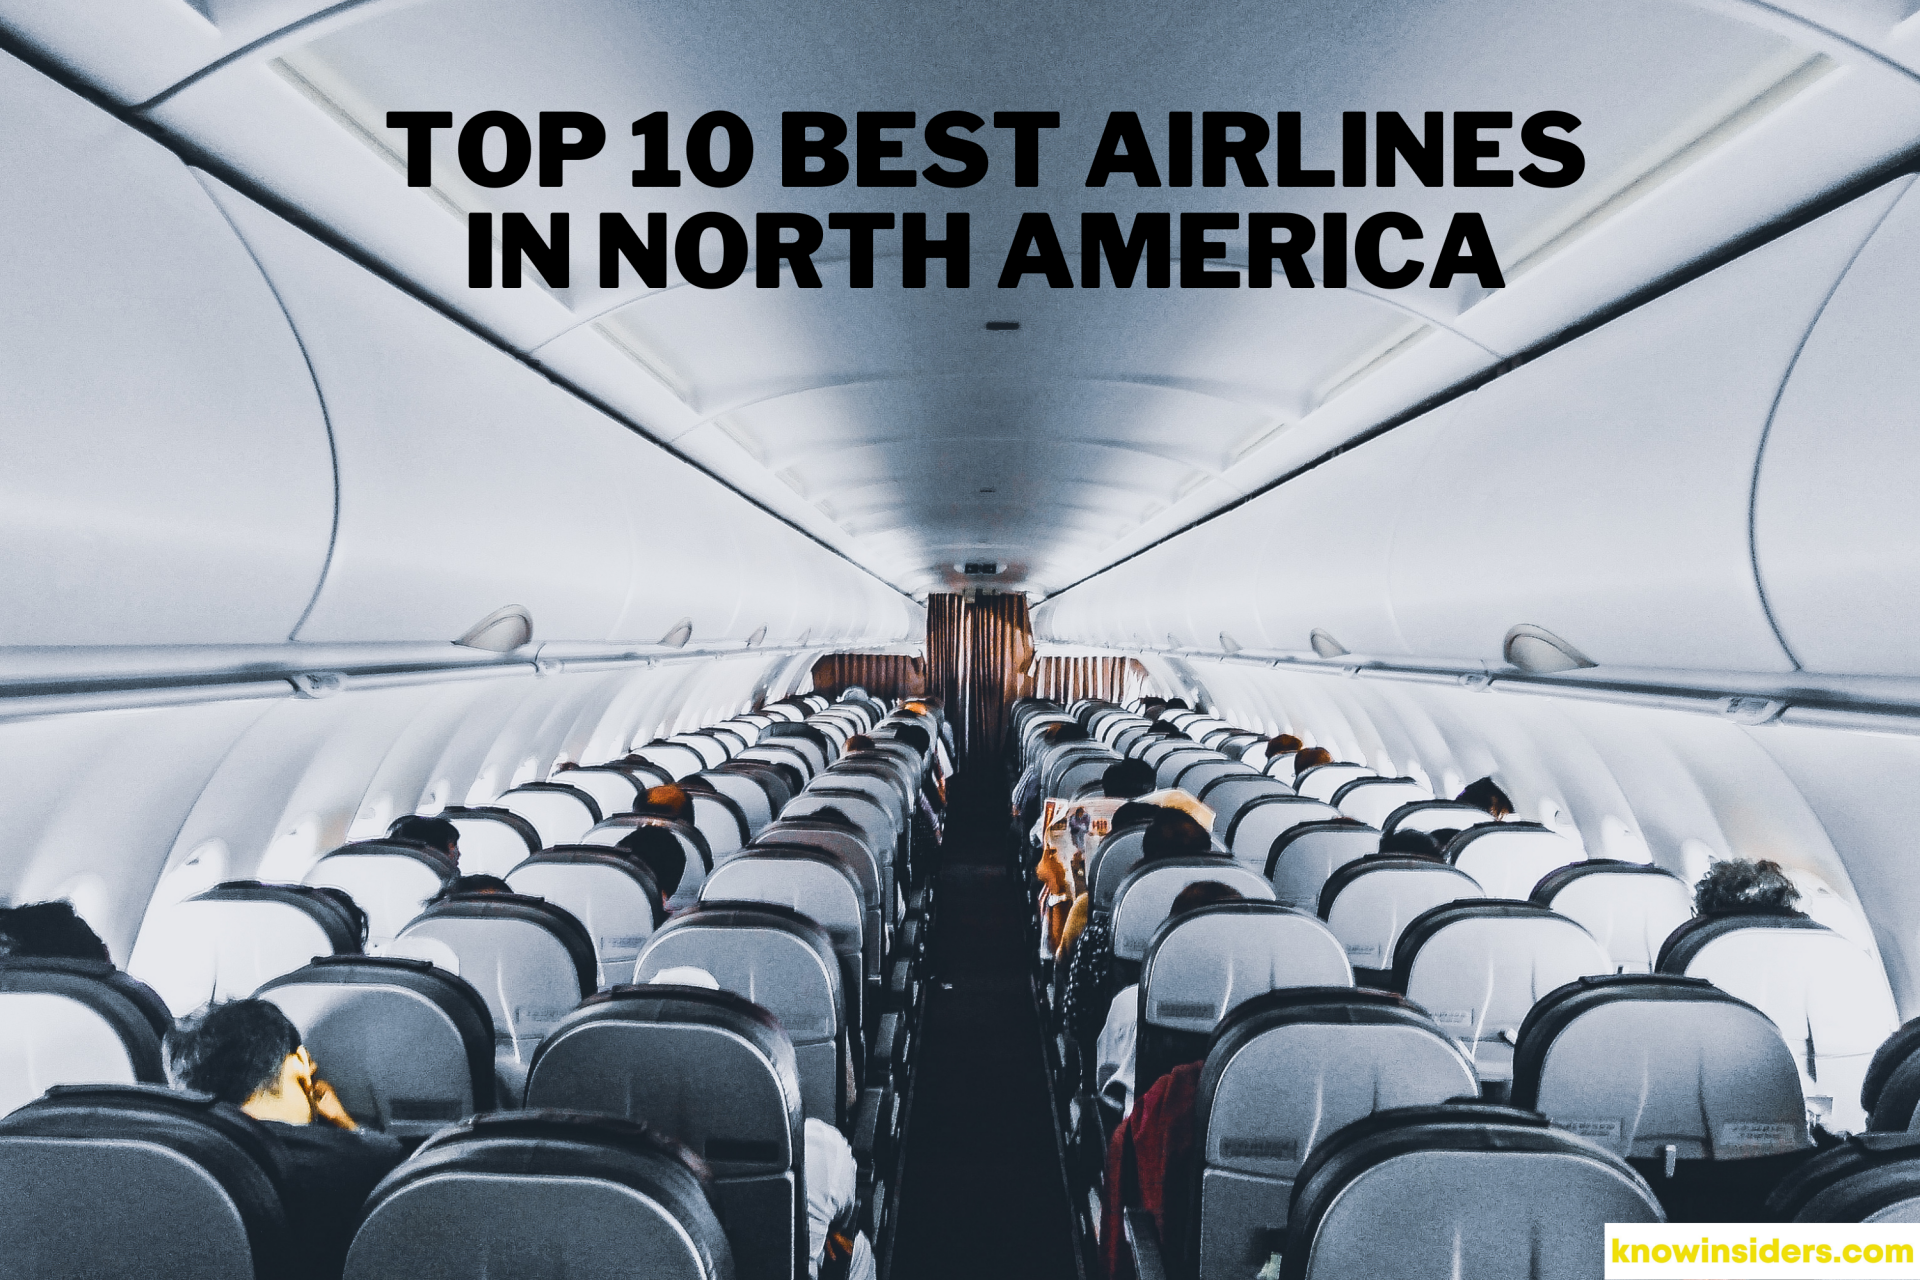 Top 10 Best Airlines In North America For 2021/22 - Skytrax